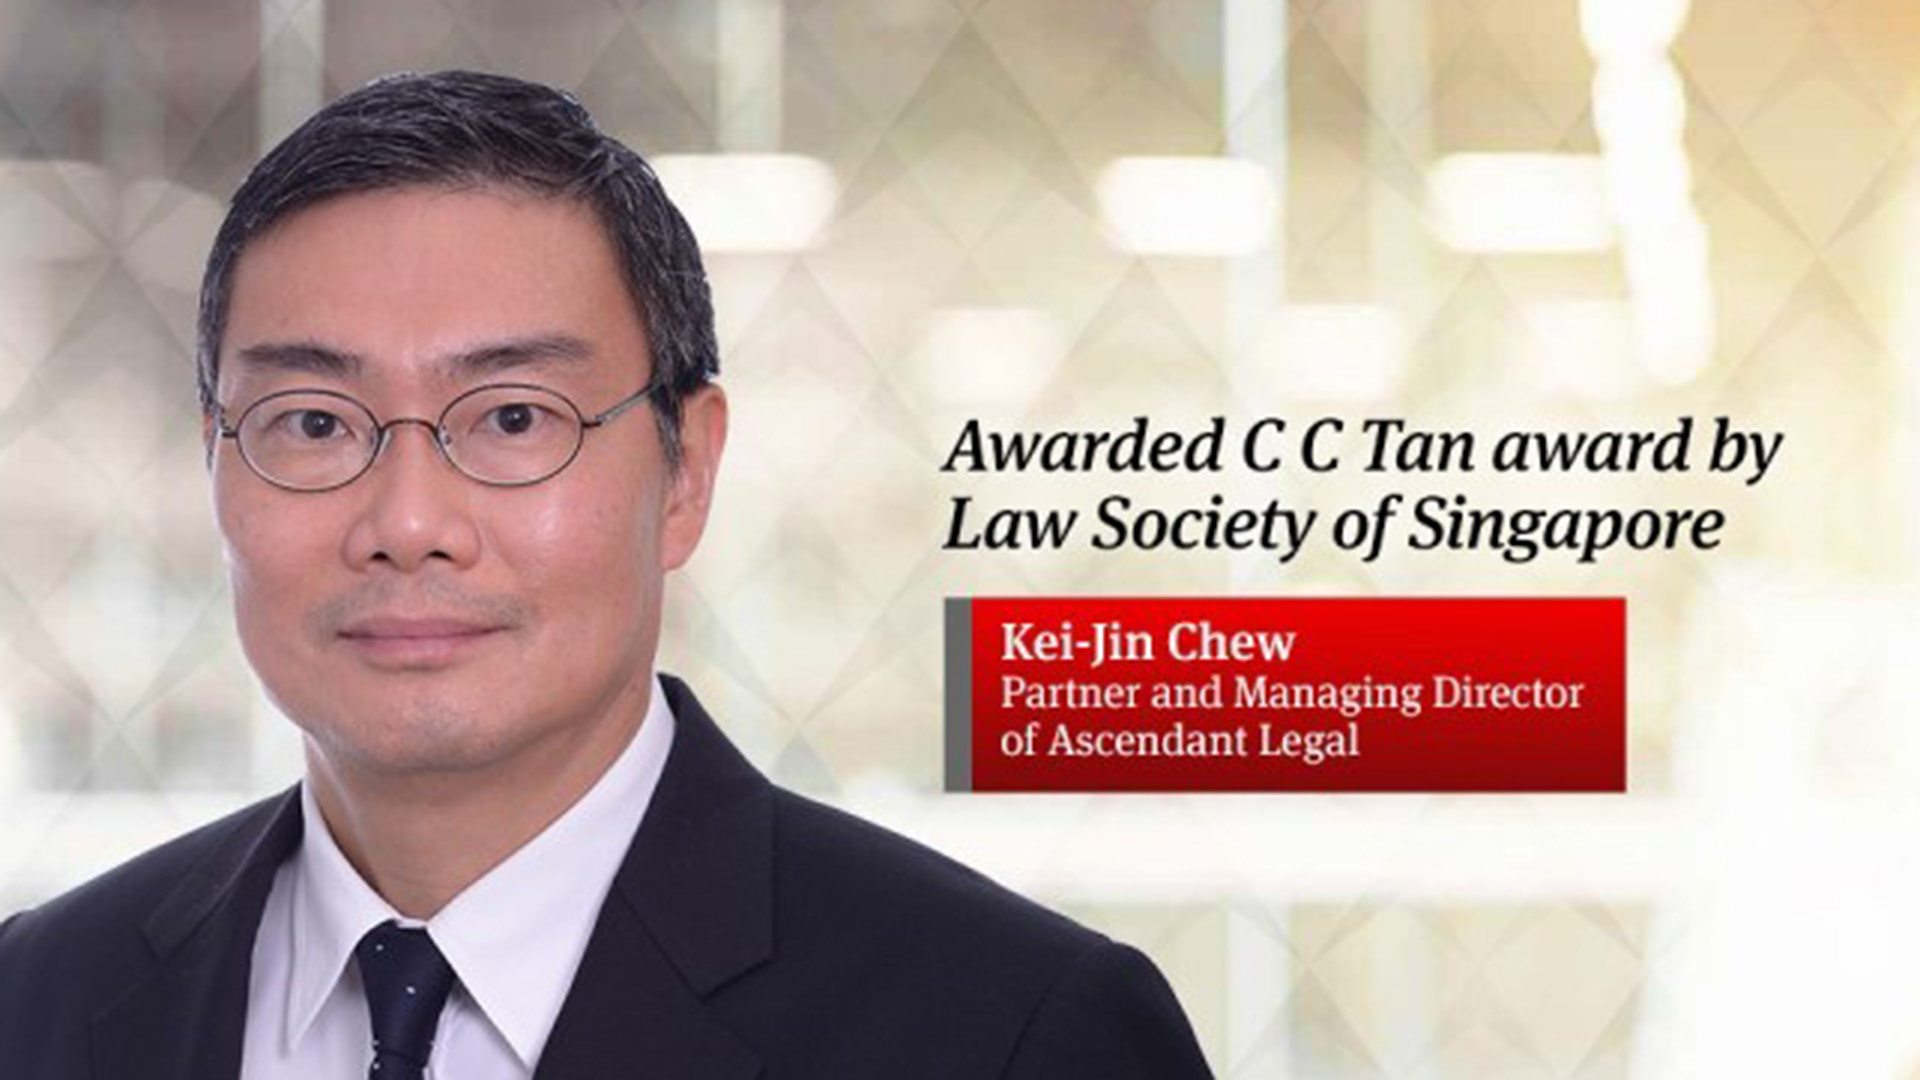 Kei-Jin Chew receives top accolade from the Law Society of Singapore